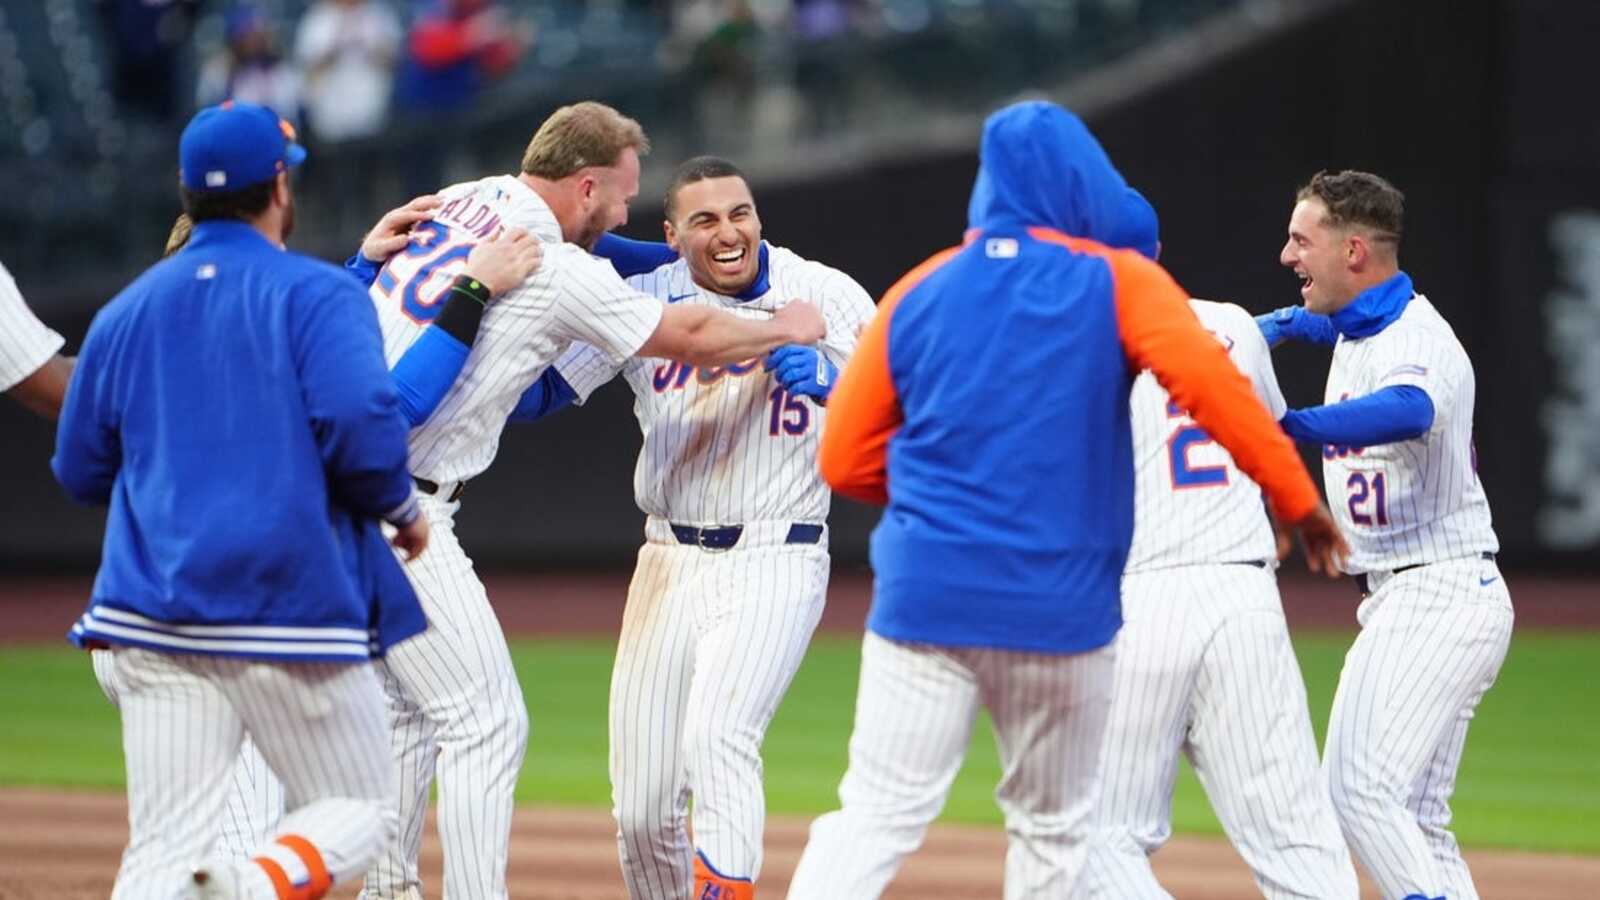 Pete Alonso, Mets eye 3-game win streak in rematch with Reds